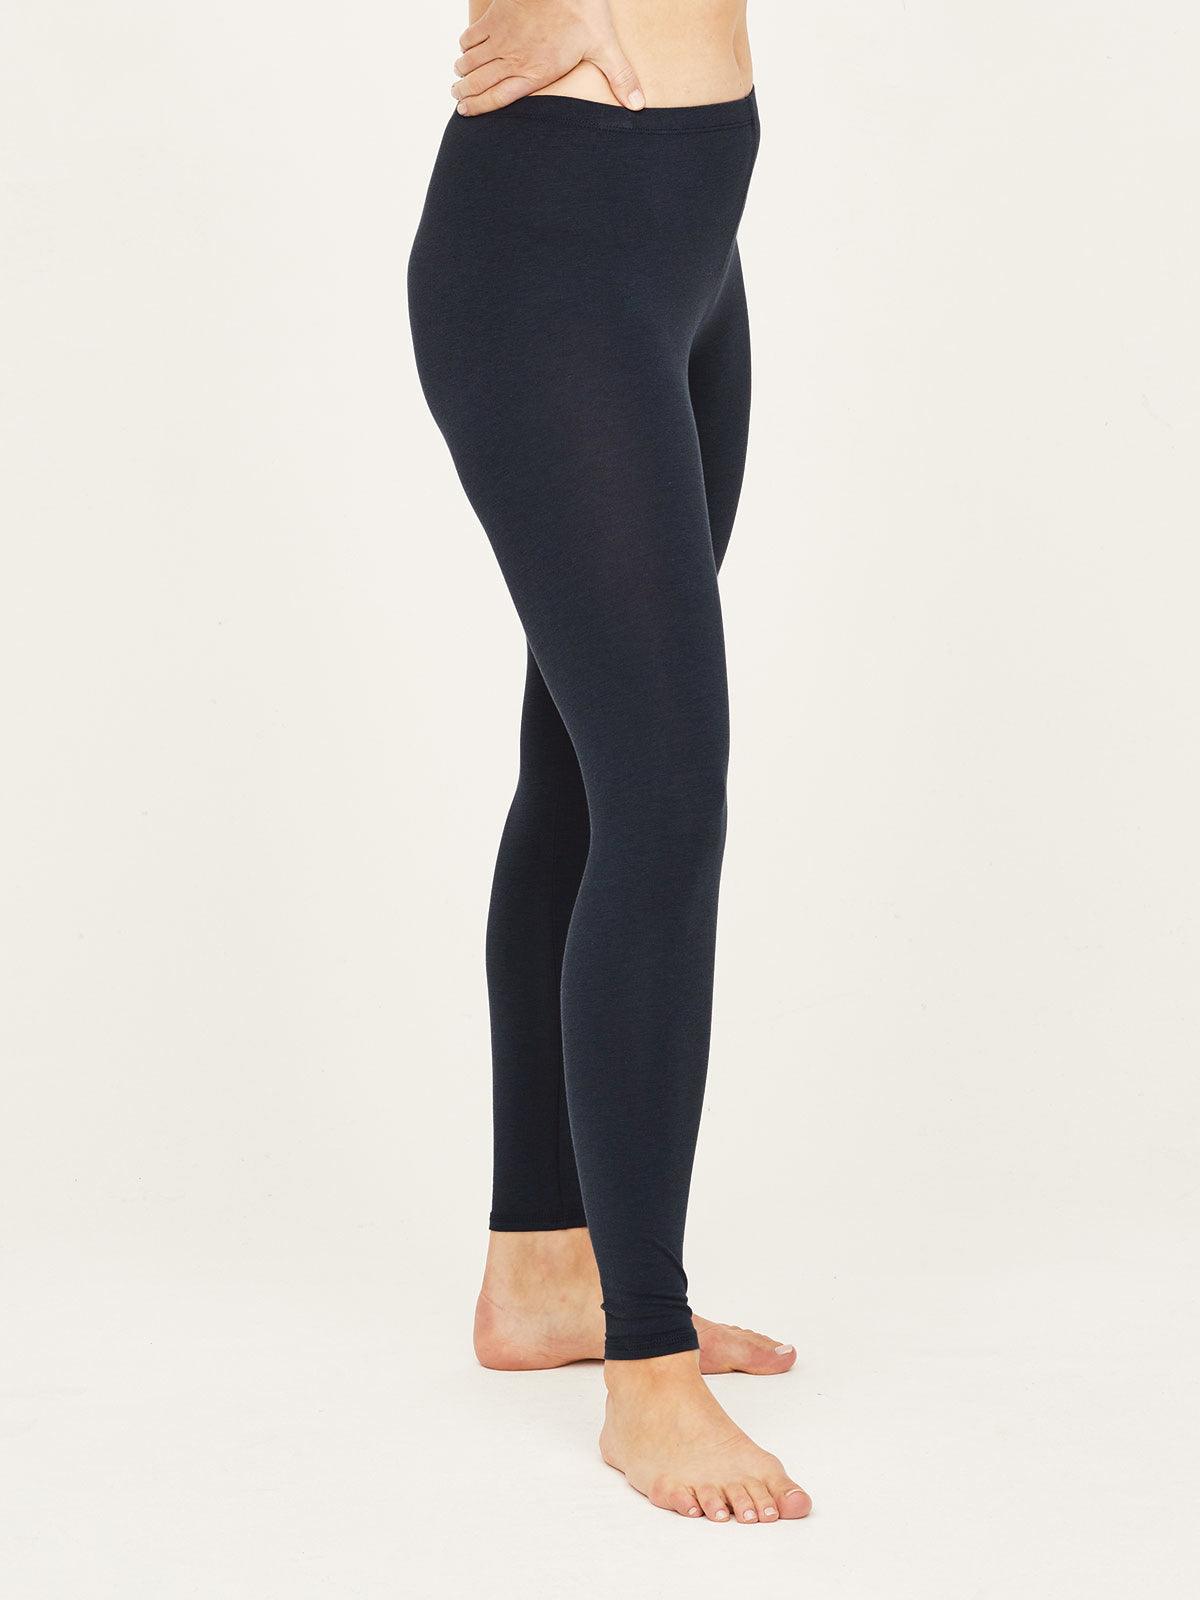 The Bamboo Base Layer Leggings in Midnight Navy